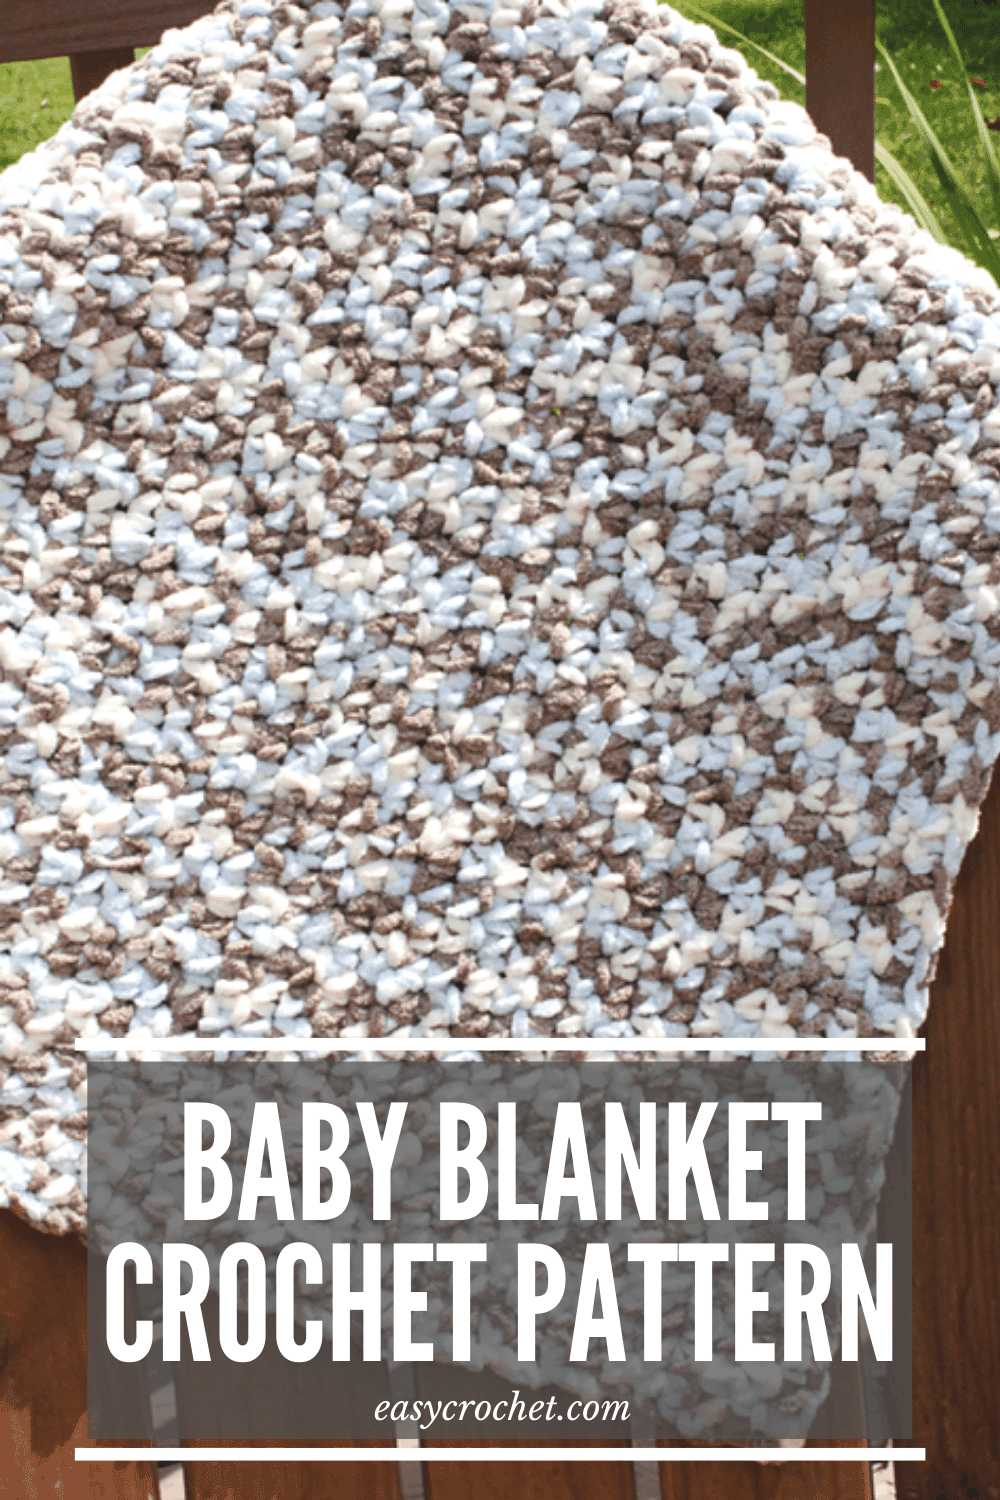 Make this easy to crochet baby blanket with this free crochet pattern from Easy Crochet. Great pattern for new crocheters or beginners. via @easycrochetcom